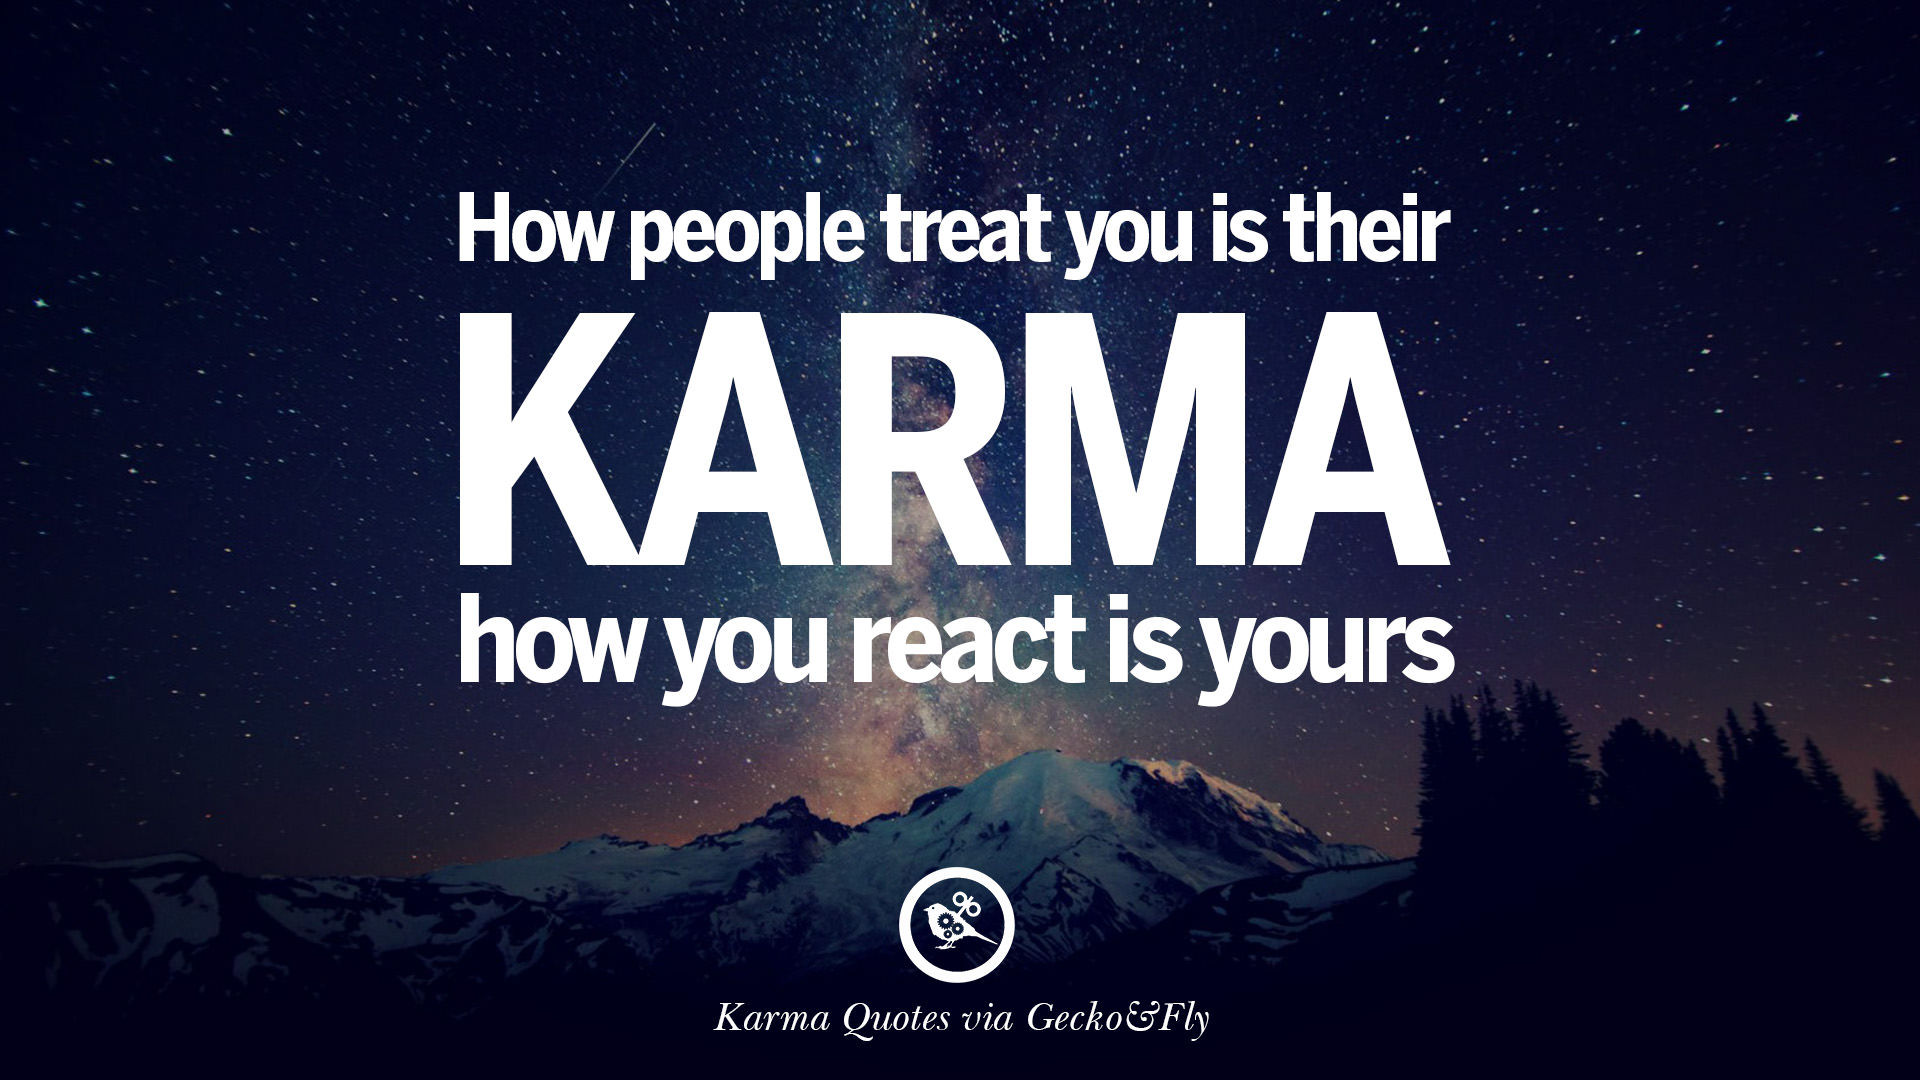 Karma quotes revenge life good relationship people wallpapers treat yours consequences funny instagram related lying react boyfriend their tumblr geckoandfly